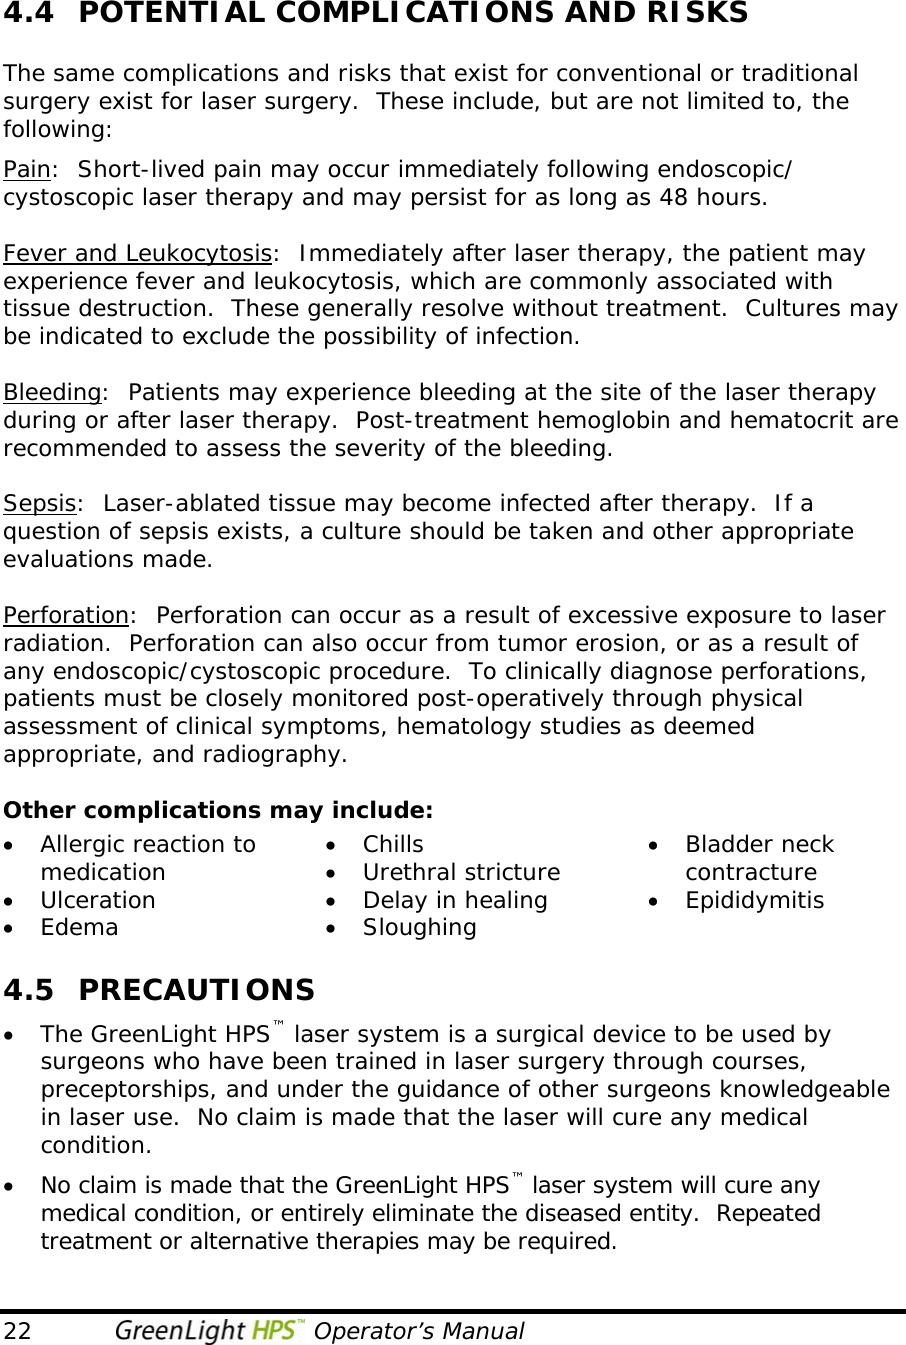  22                                   Operator’s Manual 4.4  POTENTIAL COMPLICATIONS AND RISKS  The same complications and risks that exist for conventional or traditional surgery exist for laser surgery.  These include, but are not limited to, the following: Pain:  Short-lived pain may occur immediately following endoscopic/ cystoscopic laser therapy and may persist for as long as 48 hours.  Fever and Leukocytosis:  Immediately after laser therapy, the patient may experience fever and leukocytosis, which are commonly associated with tissue destruction.  These generally resolve without treatment.  Cultures may be indicated to exclude the possibility of infection.  Bleeding:  Patients may experience bleeding at the site of the laser therapy during or after laser therapy.  Post-treatment hemoglobin and hematocrit are recommended to assess the severity of the bleeding.  Sepsis:  Laser-ablated tissue may become infected after therapy.  If a question of sepsis exists, a culture should be taken and other appropriate evaluations made.  Perforation:  Perforation can occur as a result of excessive exposure to laser radiation.  Perforation can also occur from tumor erosion, or as a result of any endoscopic/cystoscopic procedure.  To clinically diagnose perforations, patients must be closely monitored post-operatively through physical assessment of clinical symptoms, hematology studies as deemed appropriate, and radiography.  Other complications may include: • Allergic reaction to medication • Ulceration • Edema • Chills • Urethral stricture • Delay in healing • Sloughing • Bladder neck contracture • Epididymitis  4.5 PRECAUTIONS • The GreenLight HPS™ laser system is a surgical device to be used by surgeons who have been trained in laser surgery through courses, preceptorships, and under the guidance of other surgeons knowledgeable in laser use.  No claim is made that the laser will cure any medical condition. • No claim is made that the GreenLight HPS™ laser system will cure any medical condition, or entirely eliminate the diseased entity.  Repeated treatment or alternative therapies may be required. 